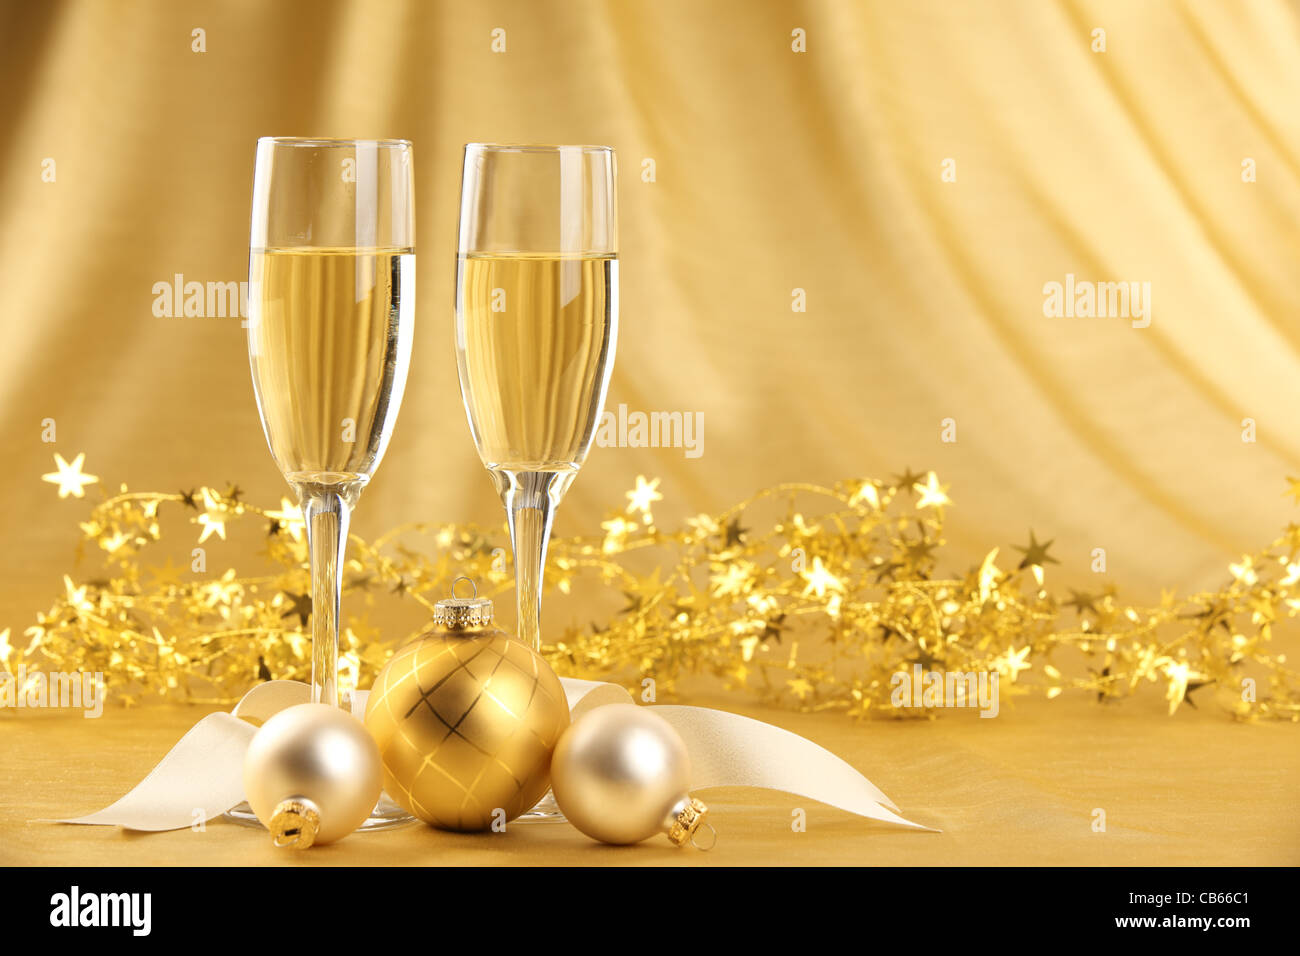 Glasses of champagne in holiday setting Stock Photo